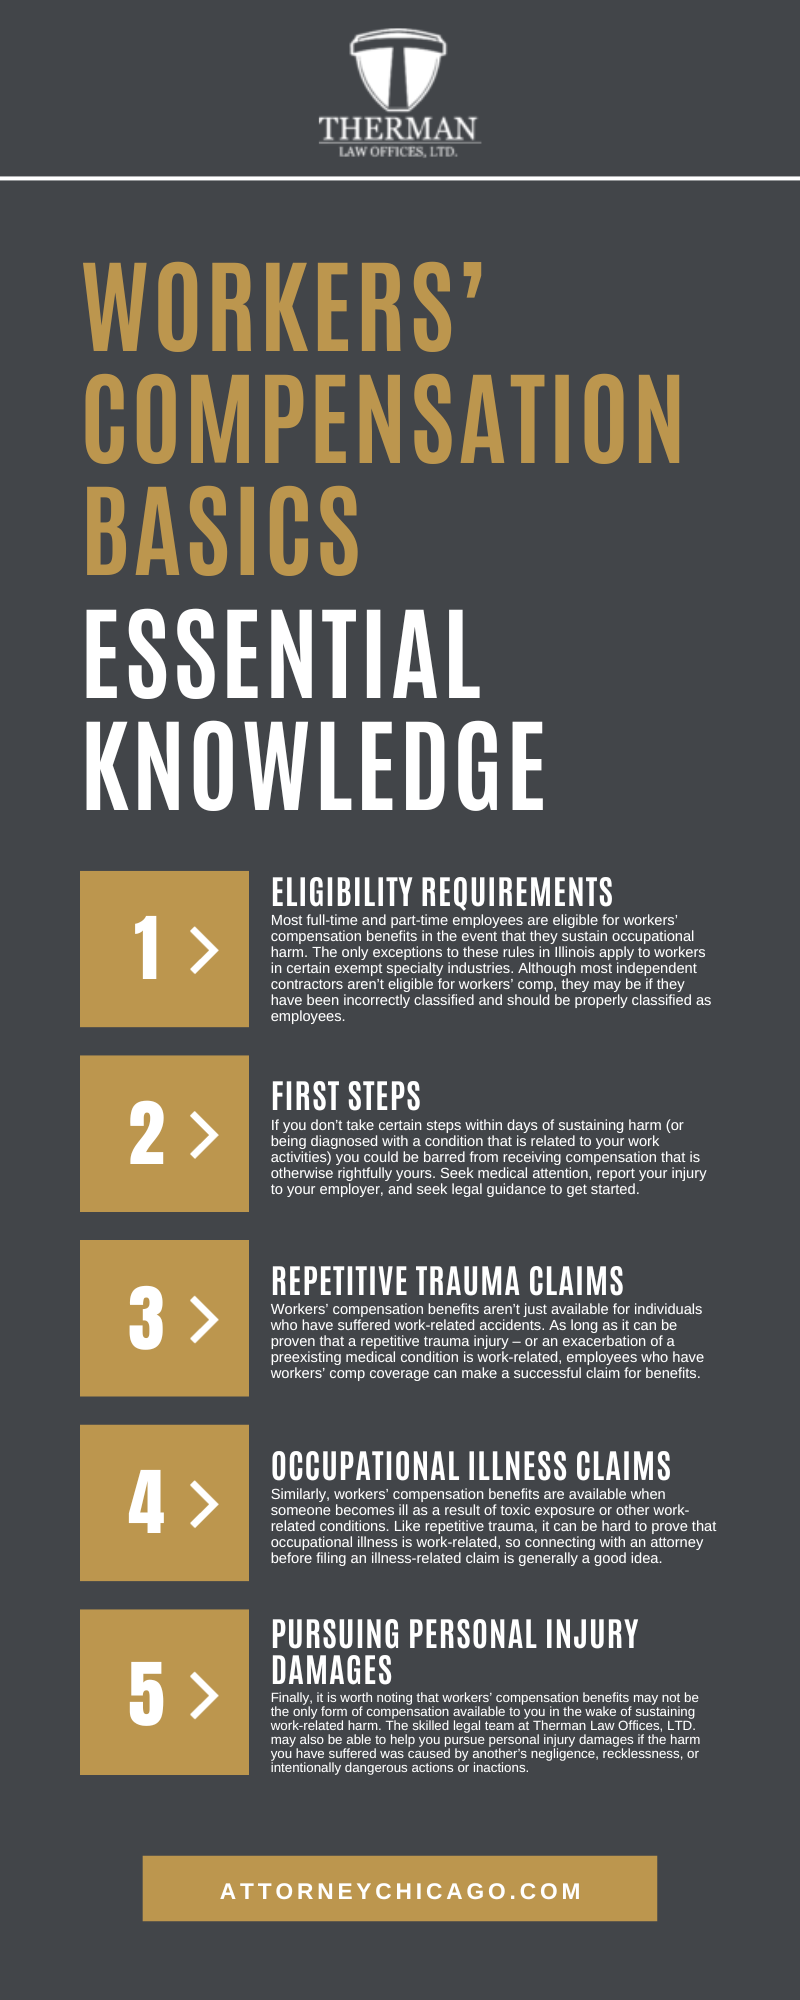 Workers' Compensation Basics Essential Knowledge Infographic